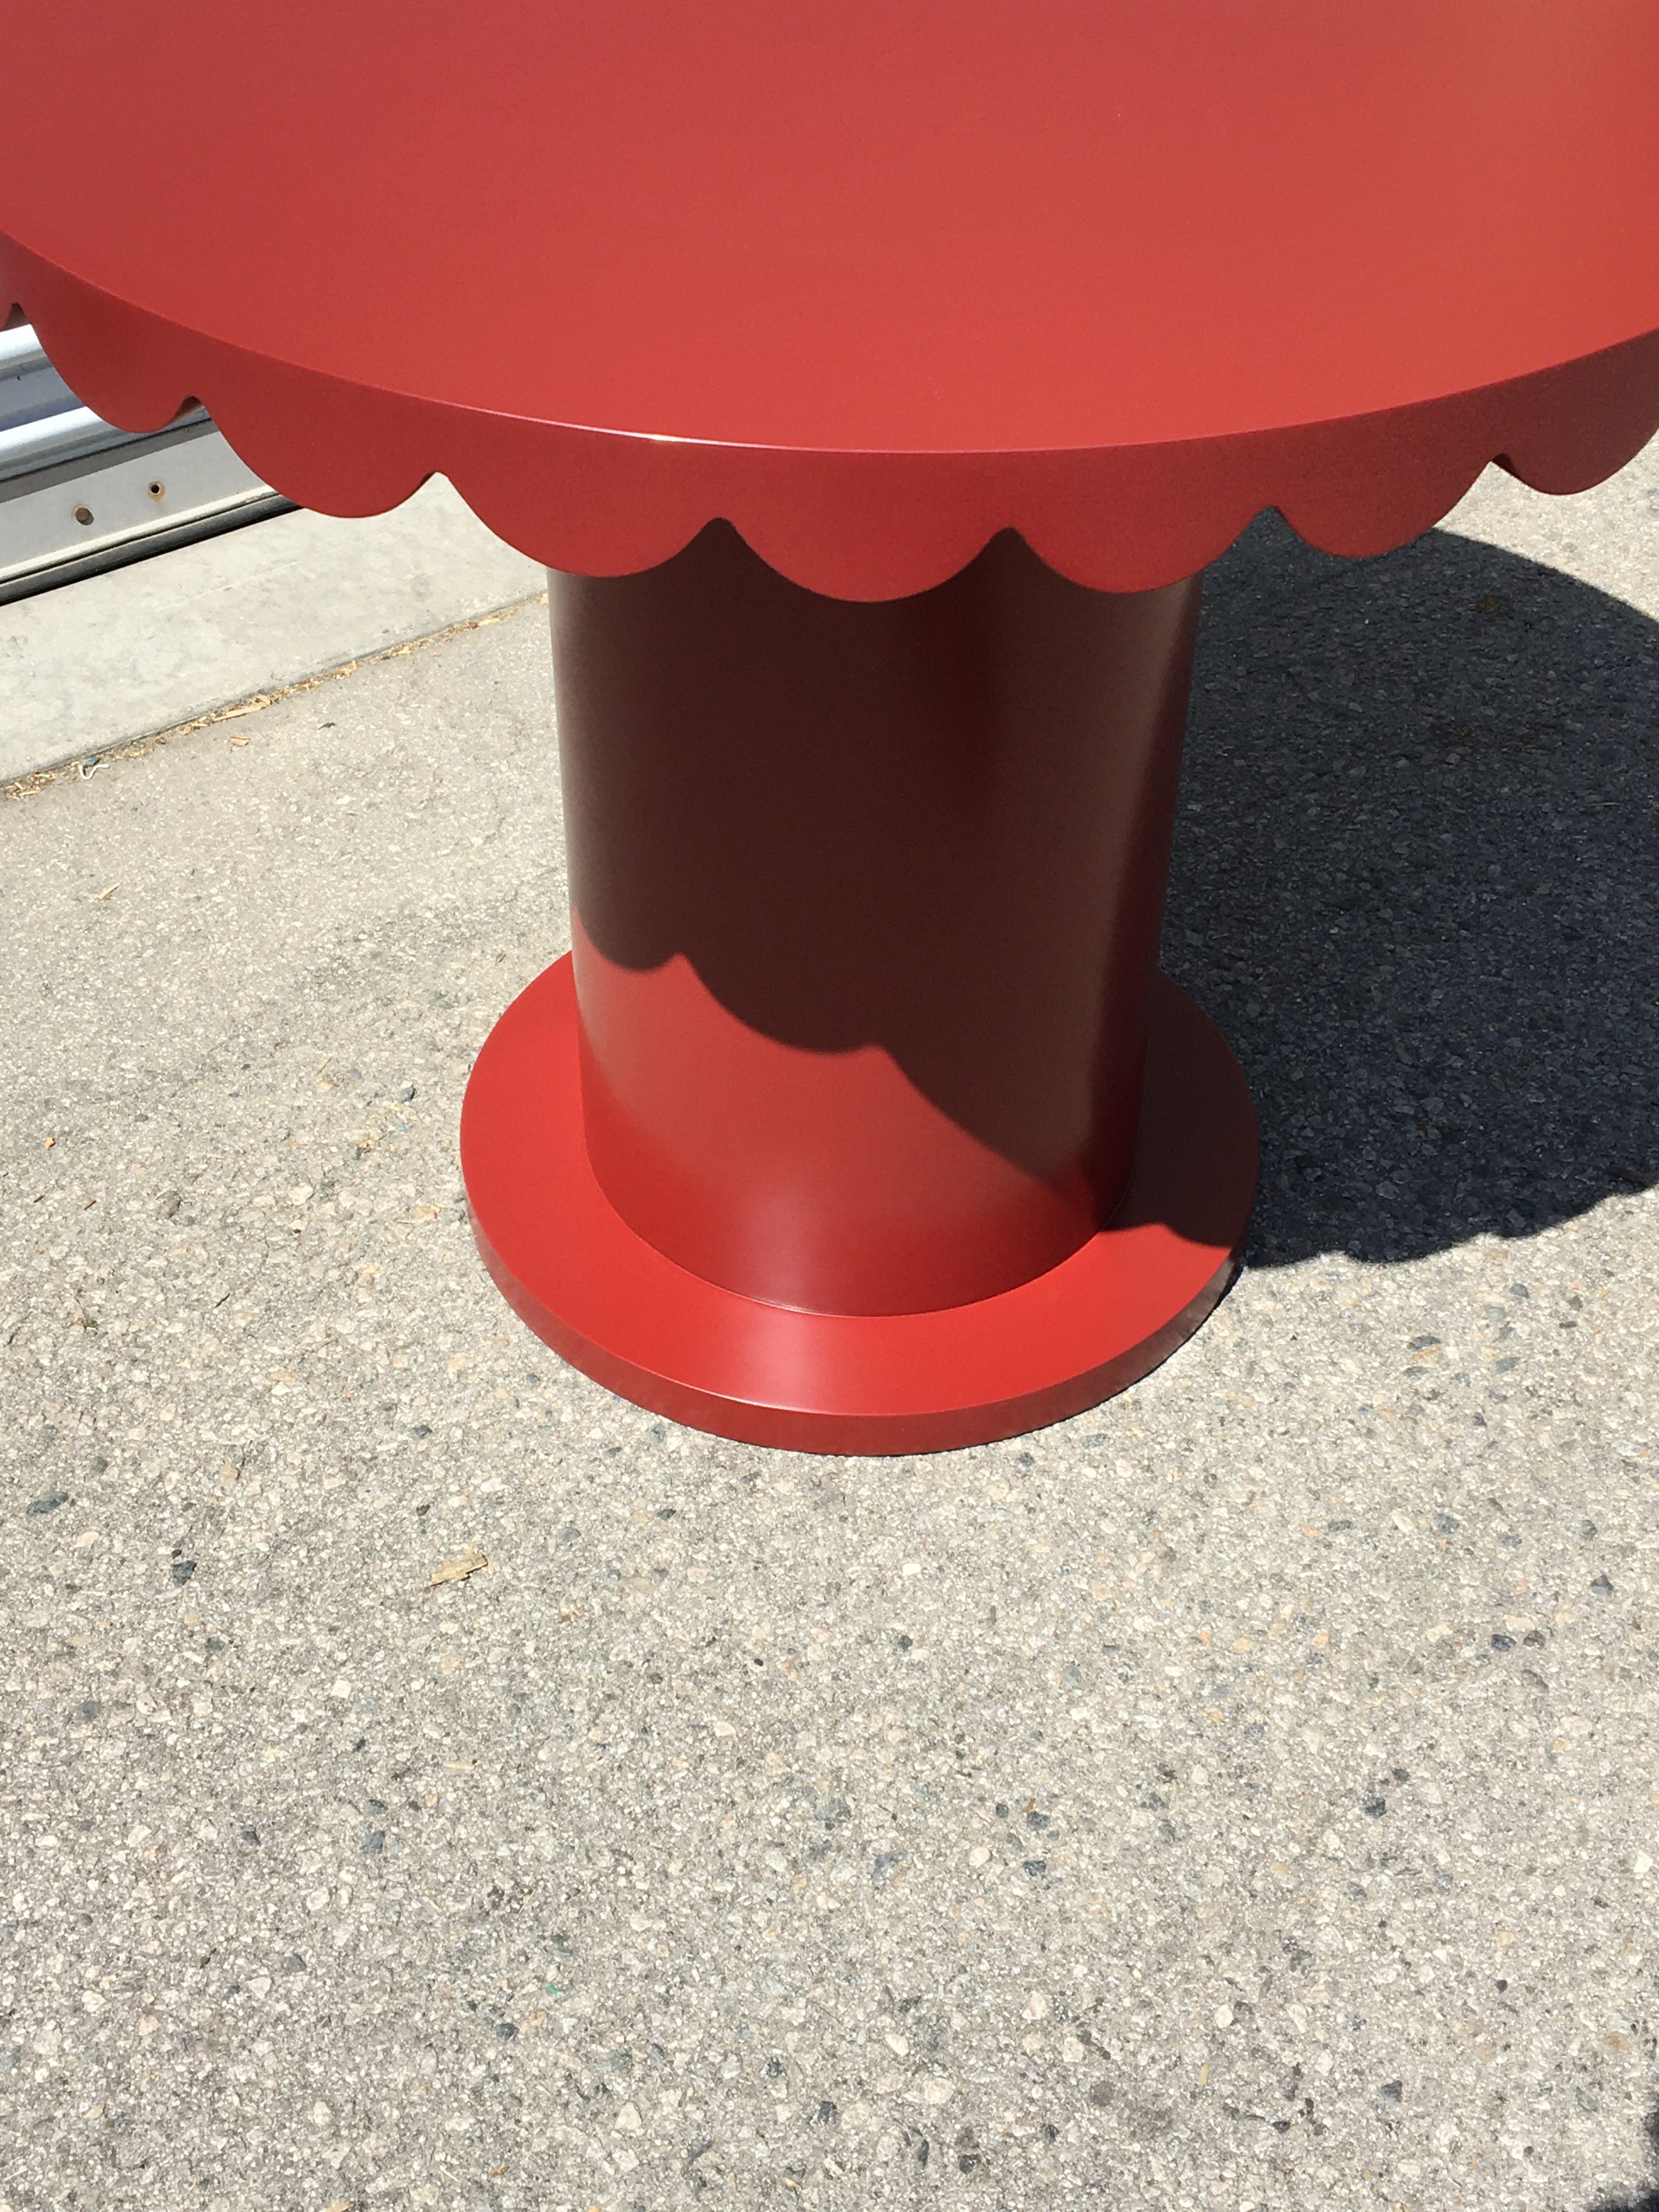  Scallop Skirt Table - red product image 3